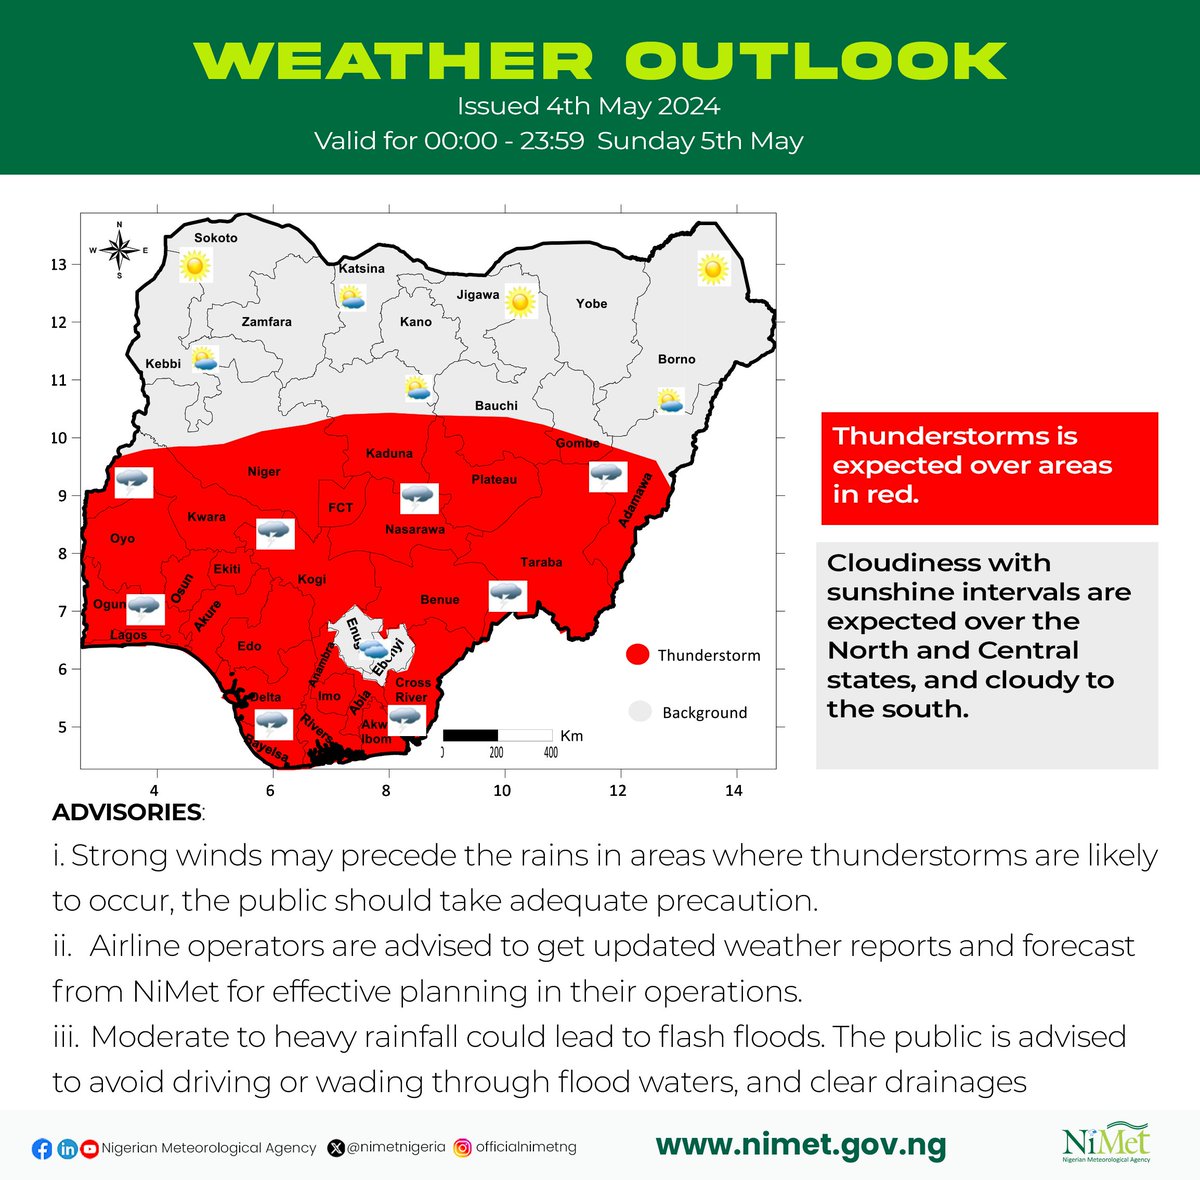 Weather Outlook issued 4th Valid 00:00 - 23:59 Sunday 5th May

Visit: youtu.be/EmGtRTQd_Fc?si…
To watch weather forecast video

#beweatheraware #nigerianweather #thunderstorms #cloudiness #cloudy #sunny #climatechange #flashfloods